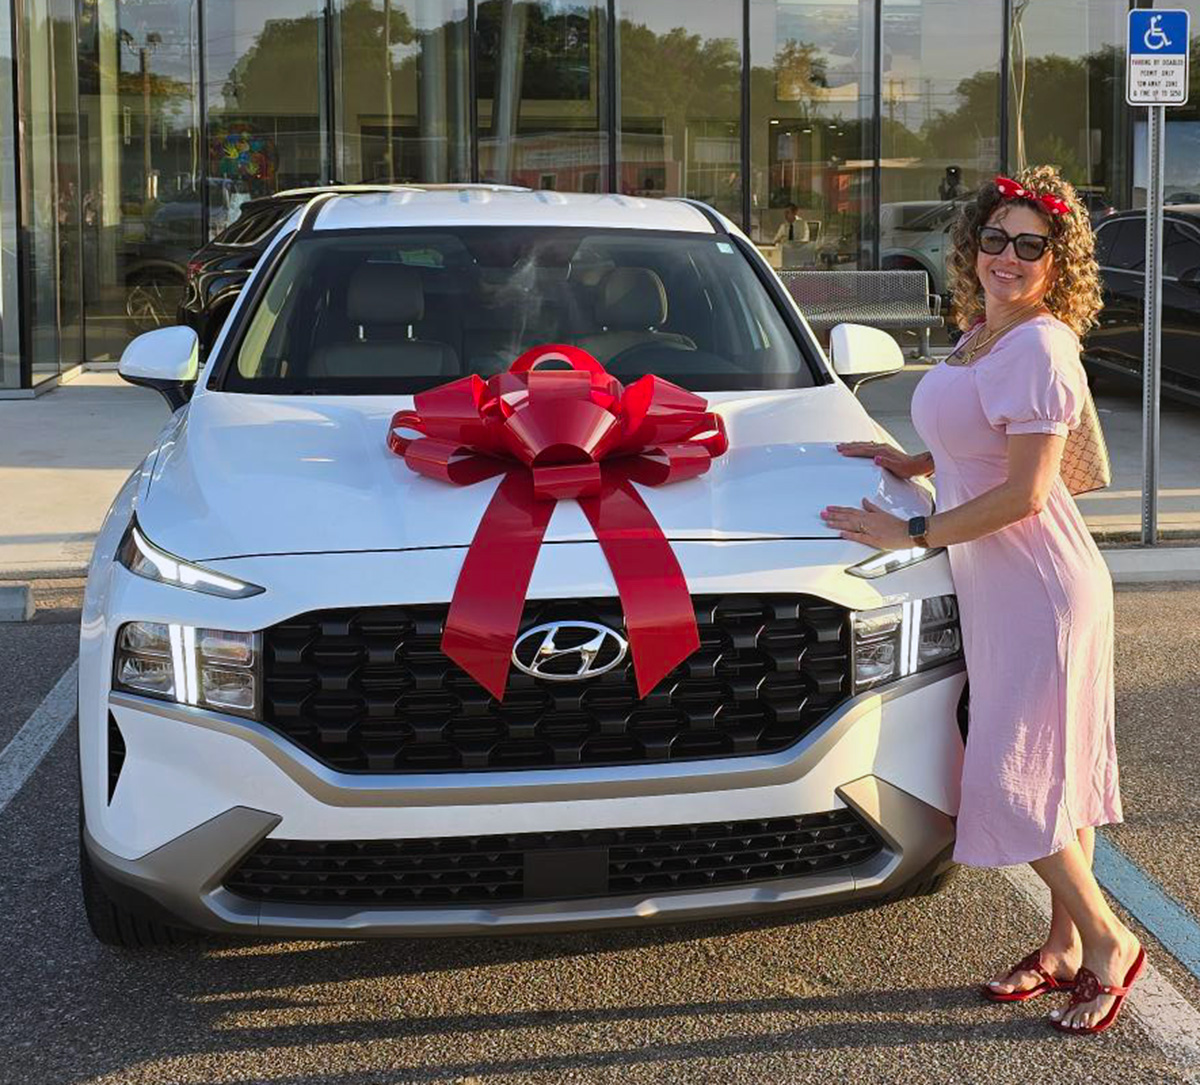 Guiolkys Gonzalez picked out her #2023SantaFe at #LakelandHyundai & salesperson #AbrahamJorge made sure it was just what she was looking for... #LookingGood Guiolkys & #ThankYou for choosing us - If we can do anything, don't hesitate... We're here for you! #Hyundai #GreatService